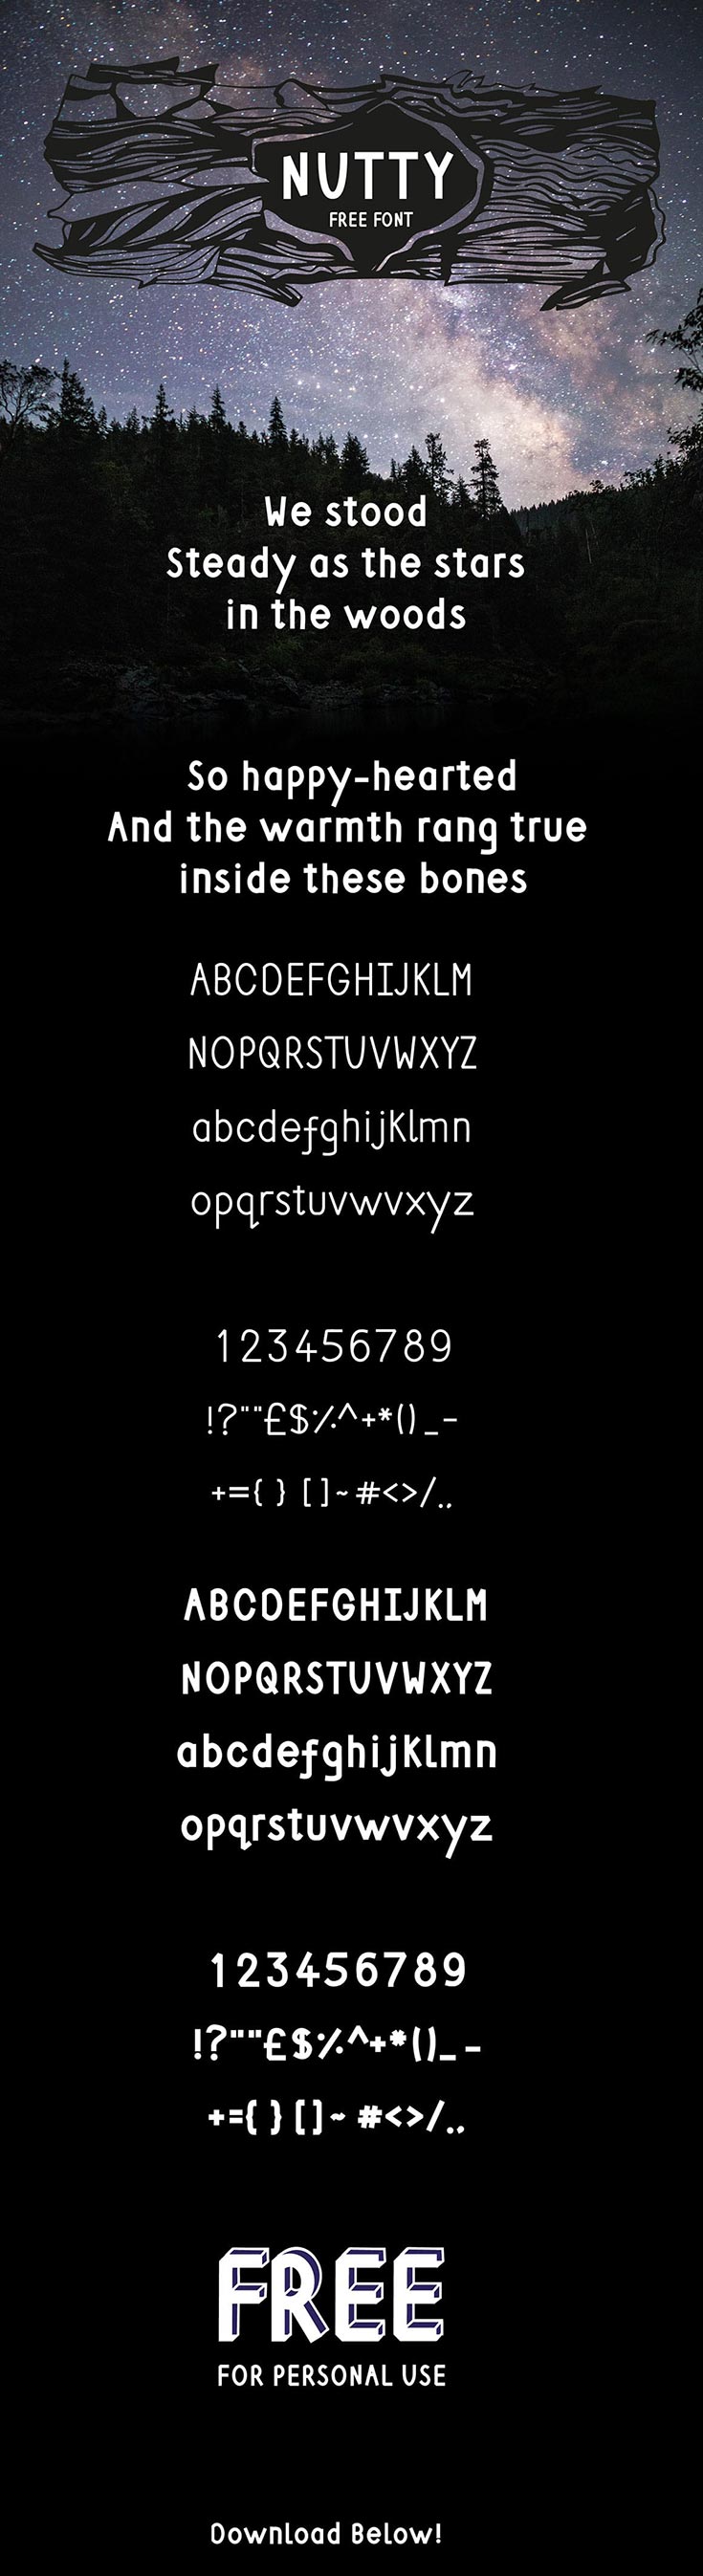 Free Nutty Font